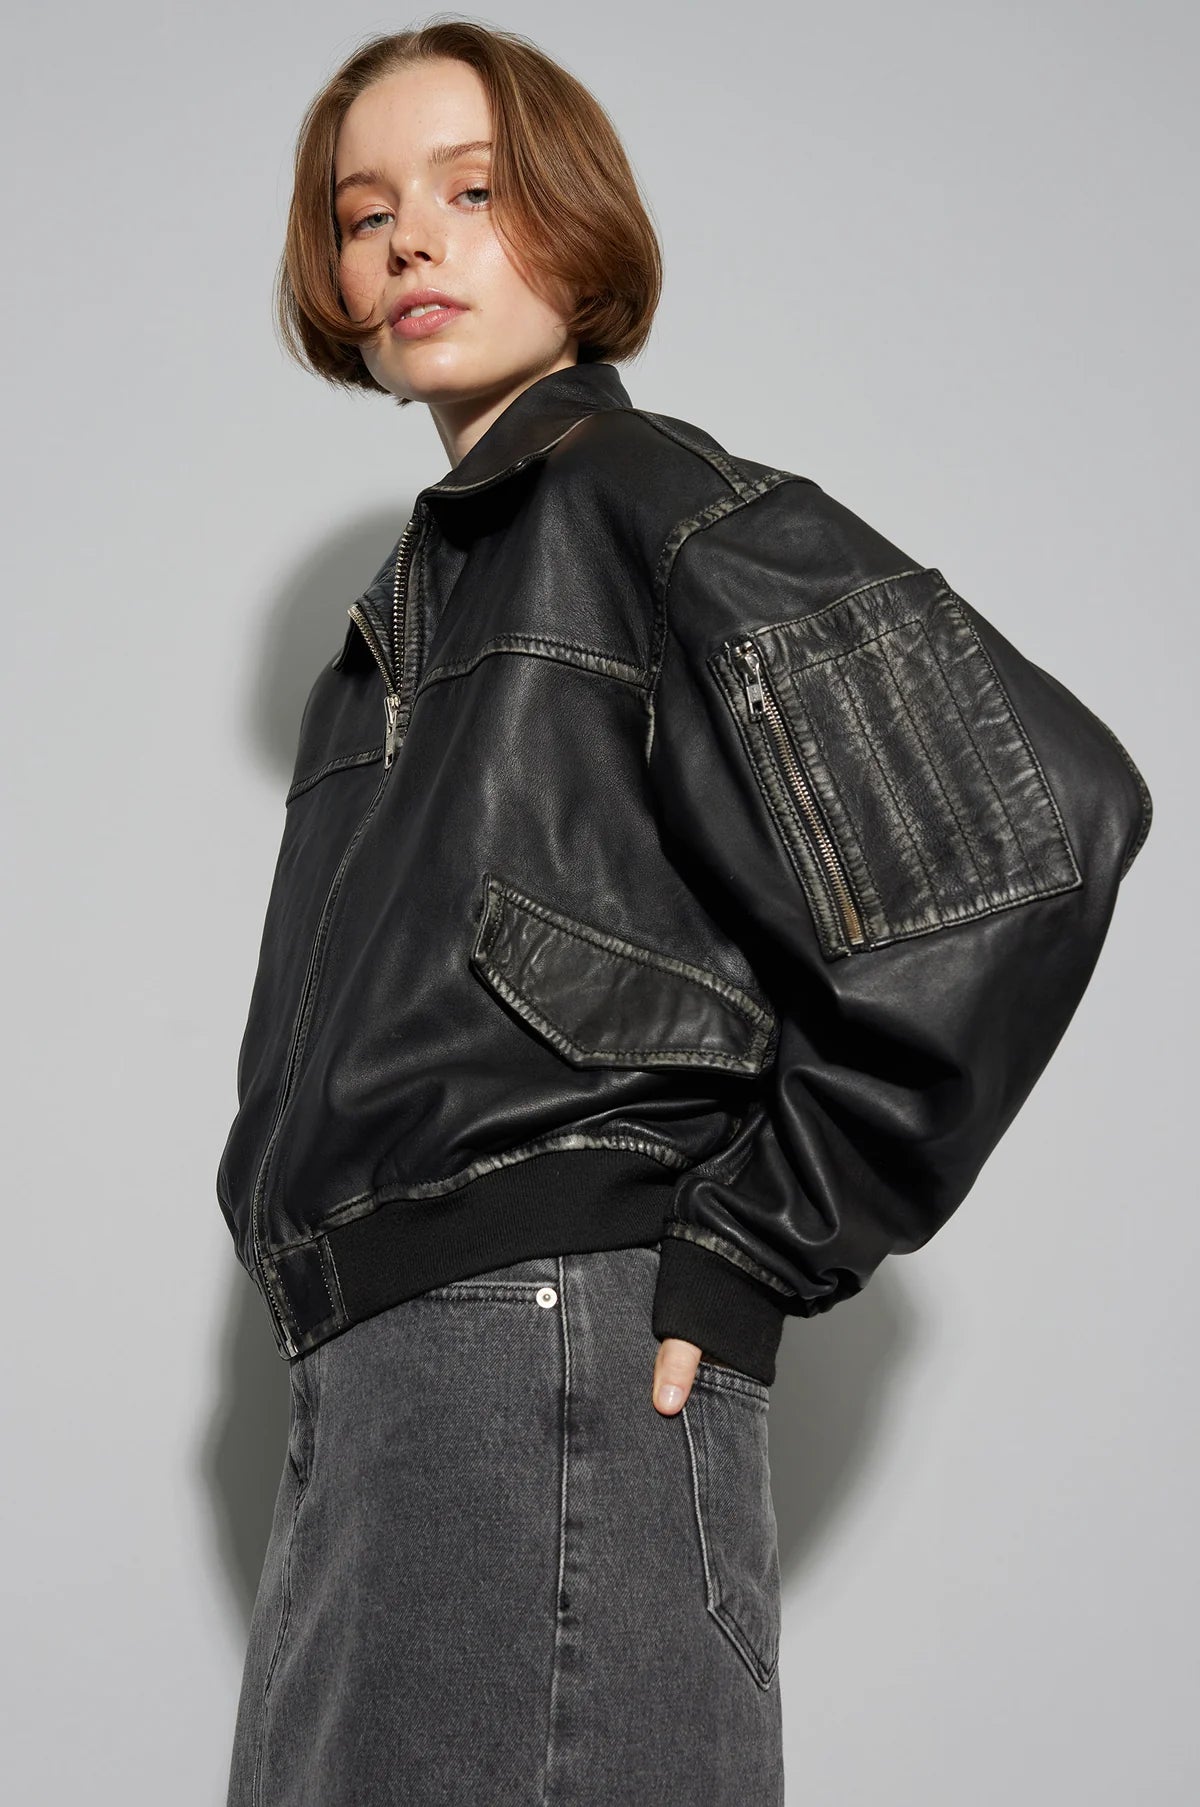 Oval Square | Rocker Leather Bomber